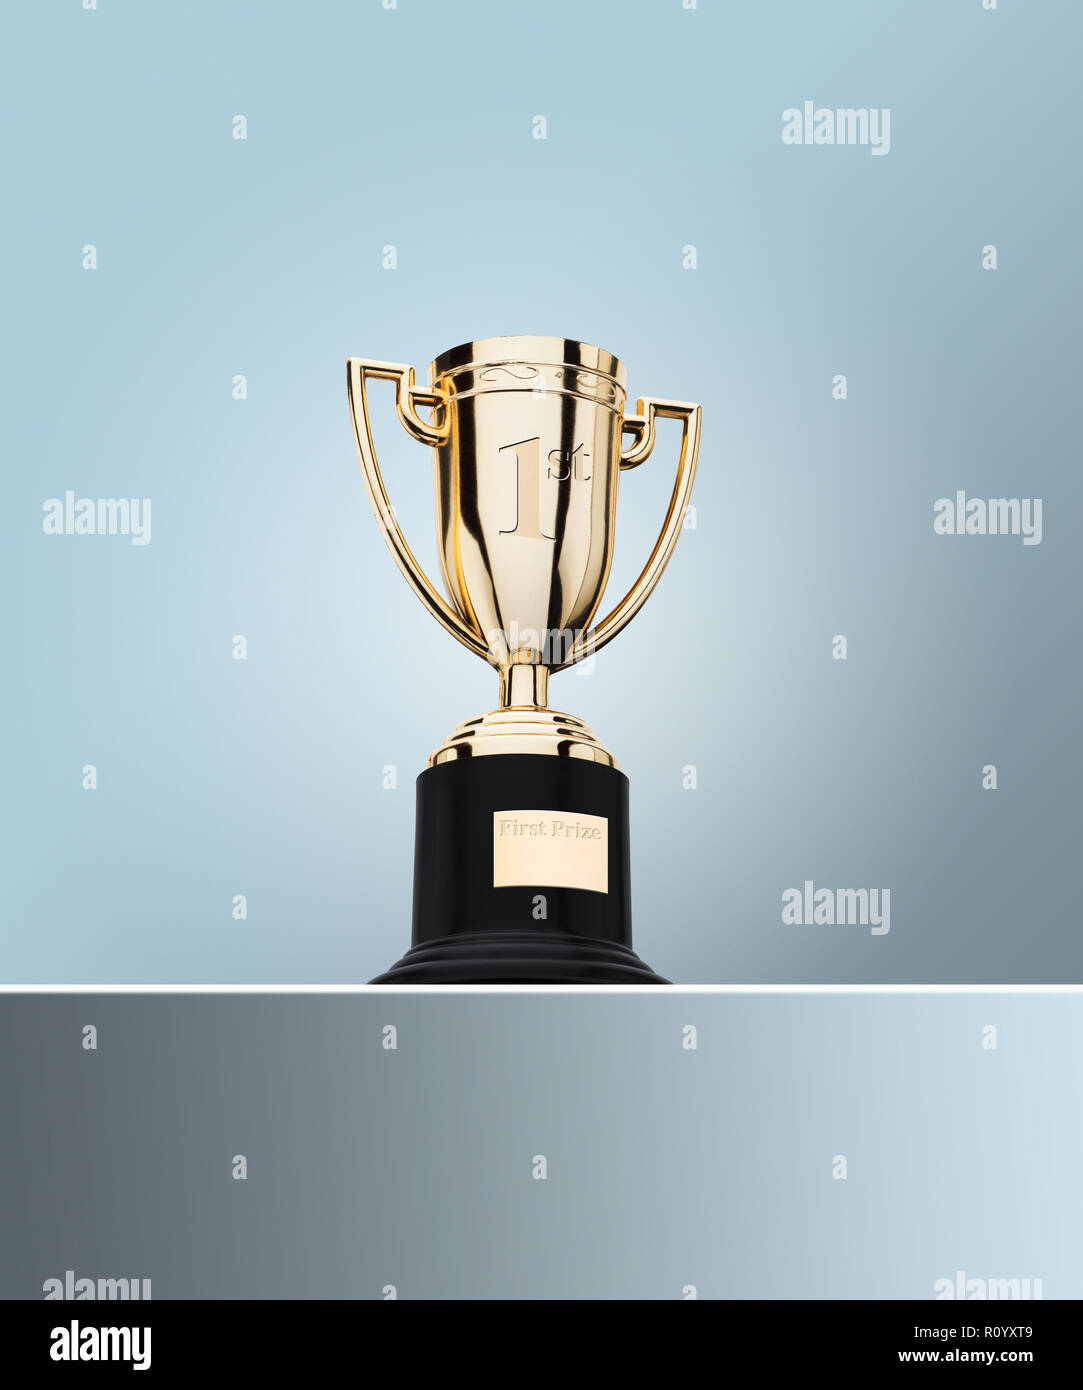 First prize gold cup trophy on table against grey background Stock Photo